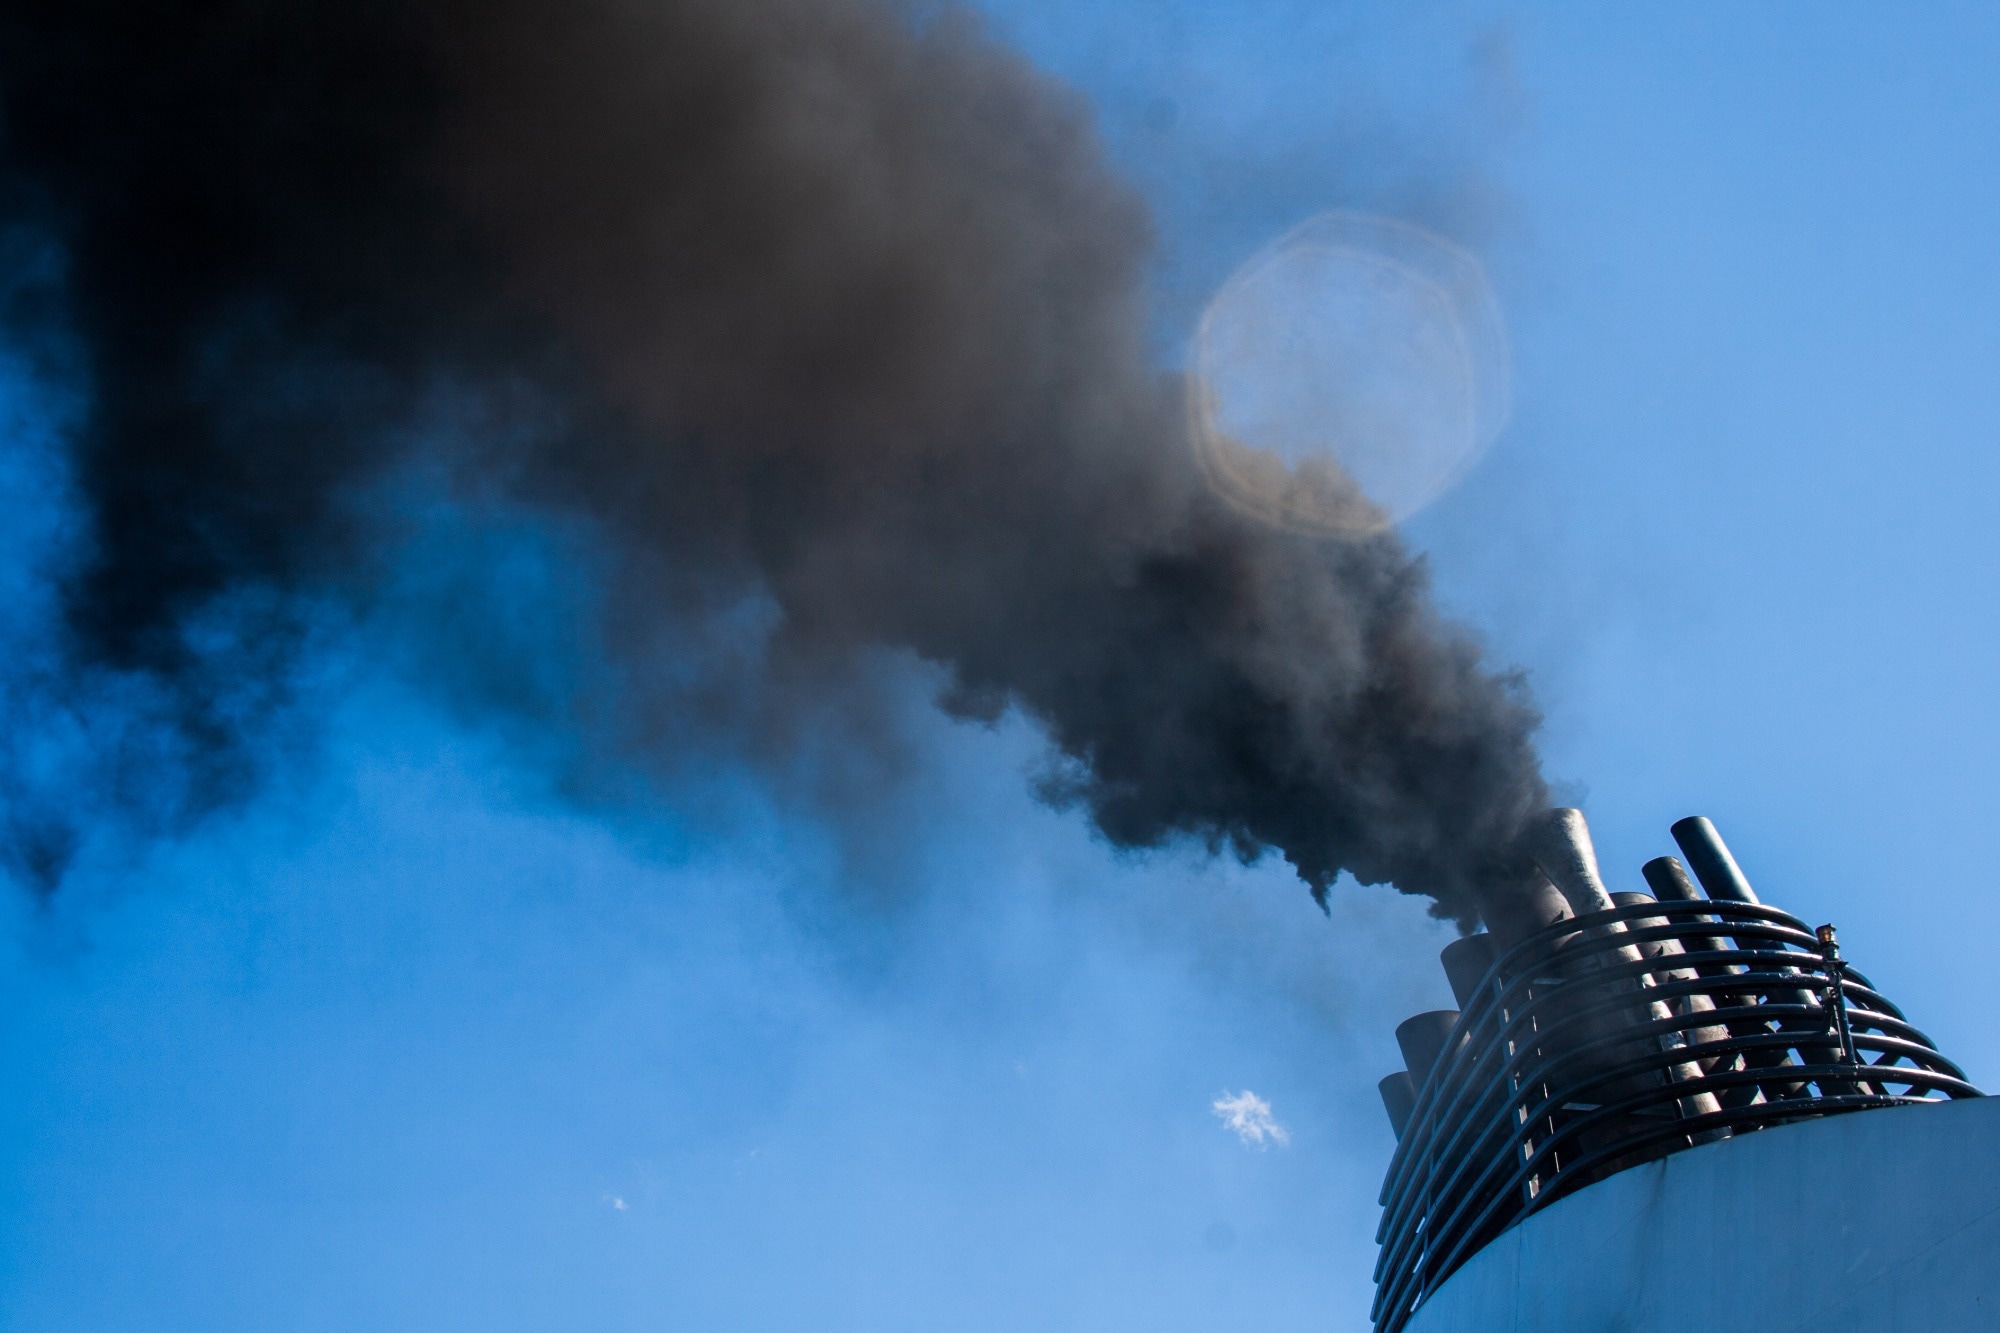 Study: Pre-admission ambient air pollution and blood soot particles predict hospitalisation outcomes in COVID-19 patients. Image Credit: MicheleUrsi/Shutterstock.com